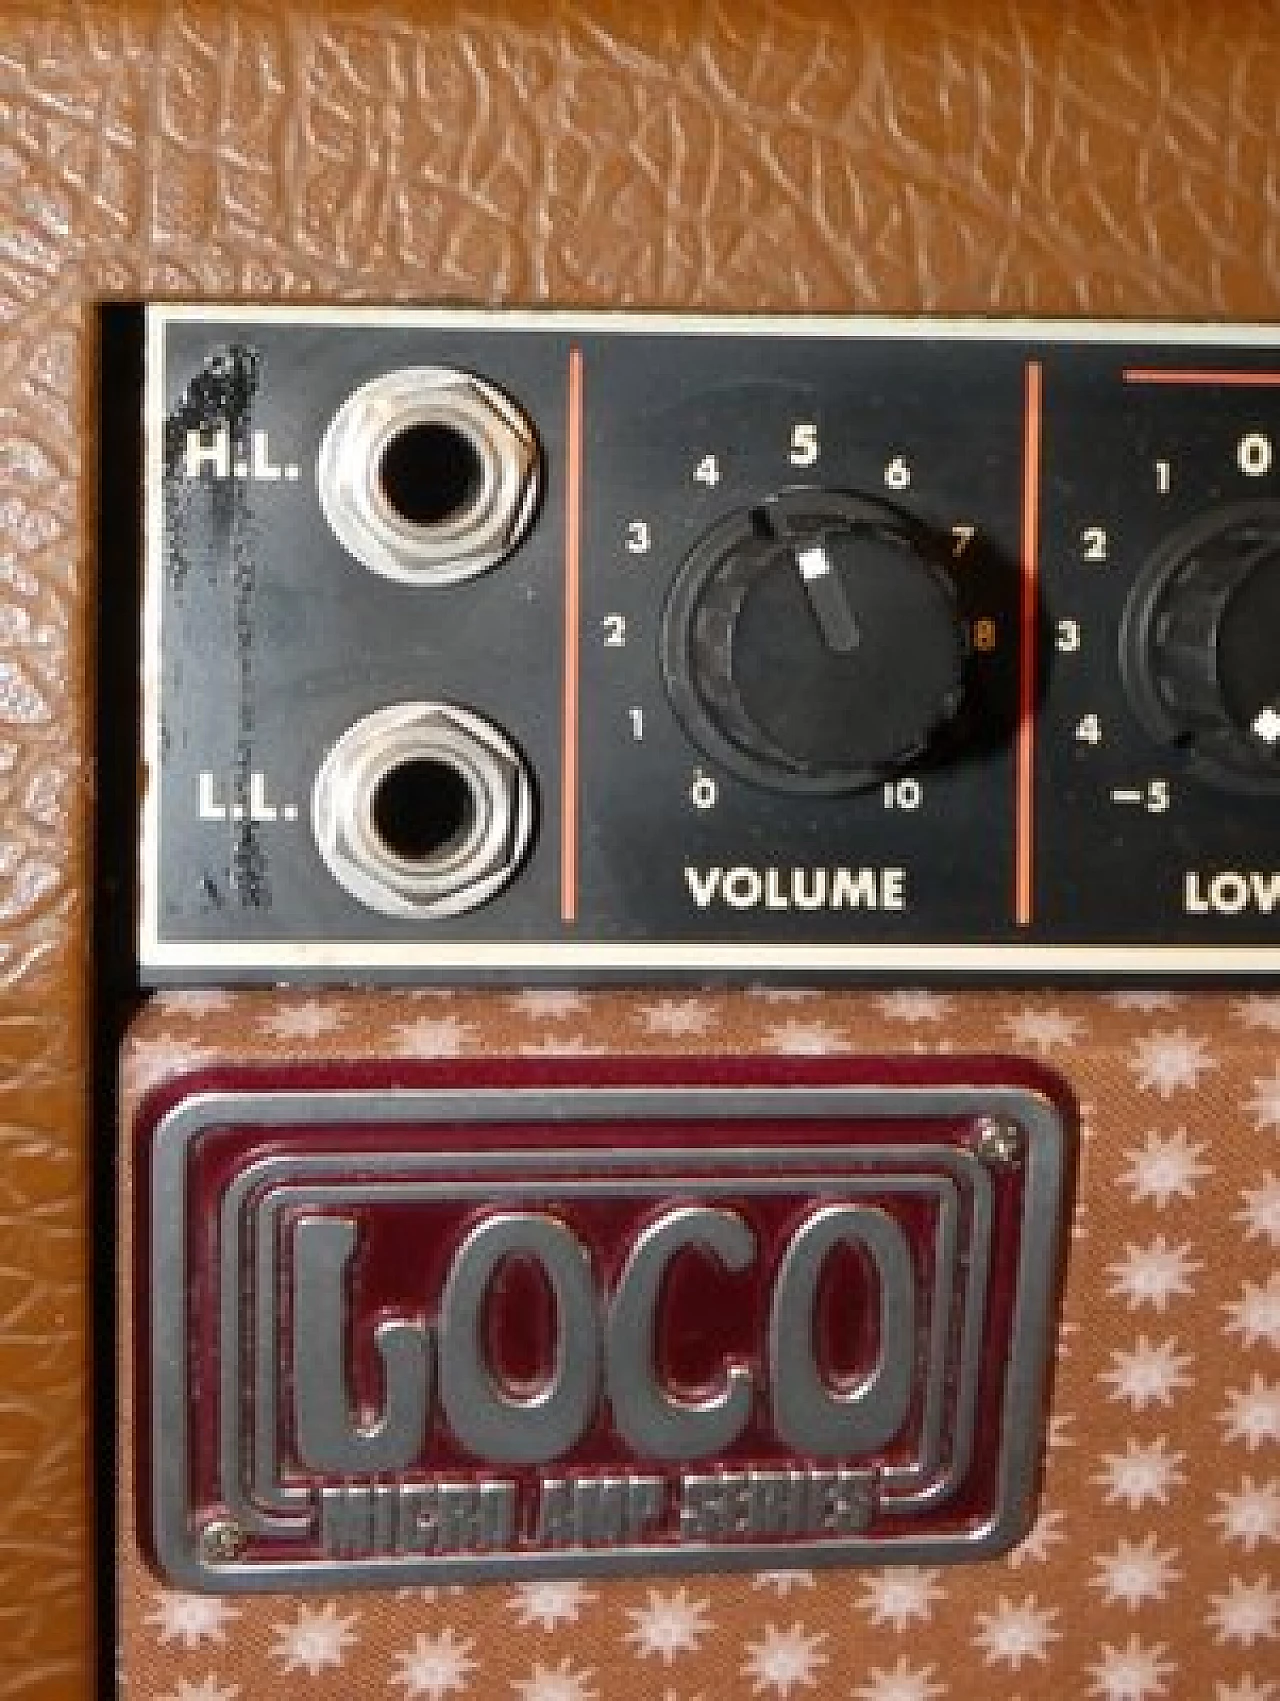 Loco 4102 amplifier from Aria, 1980s 7